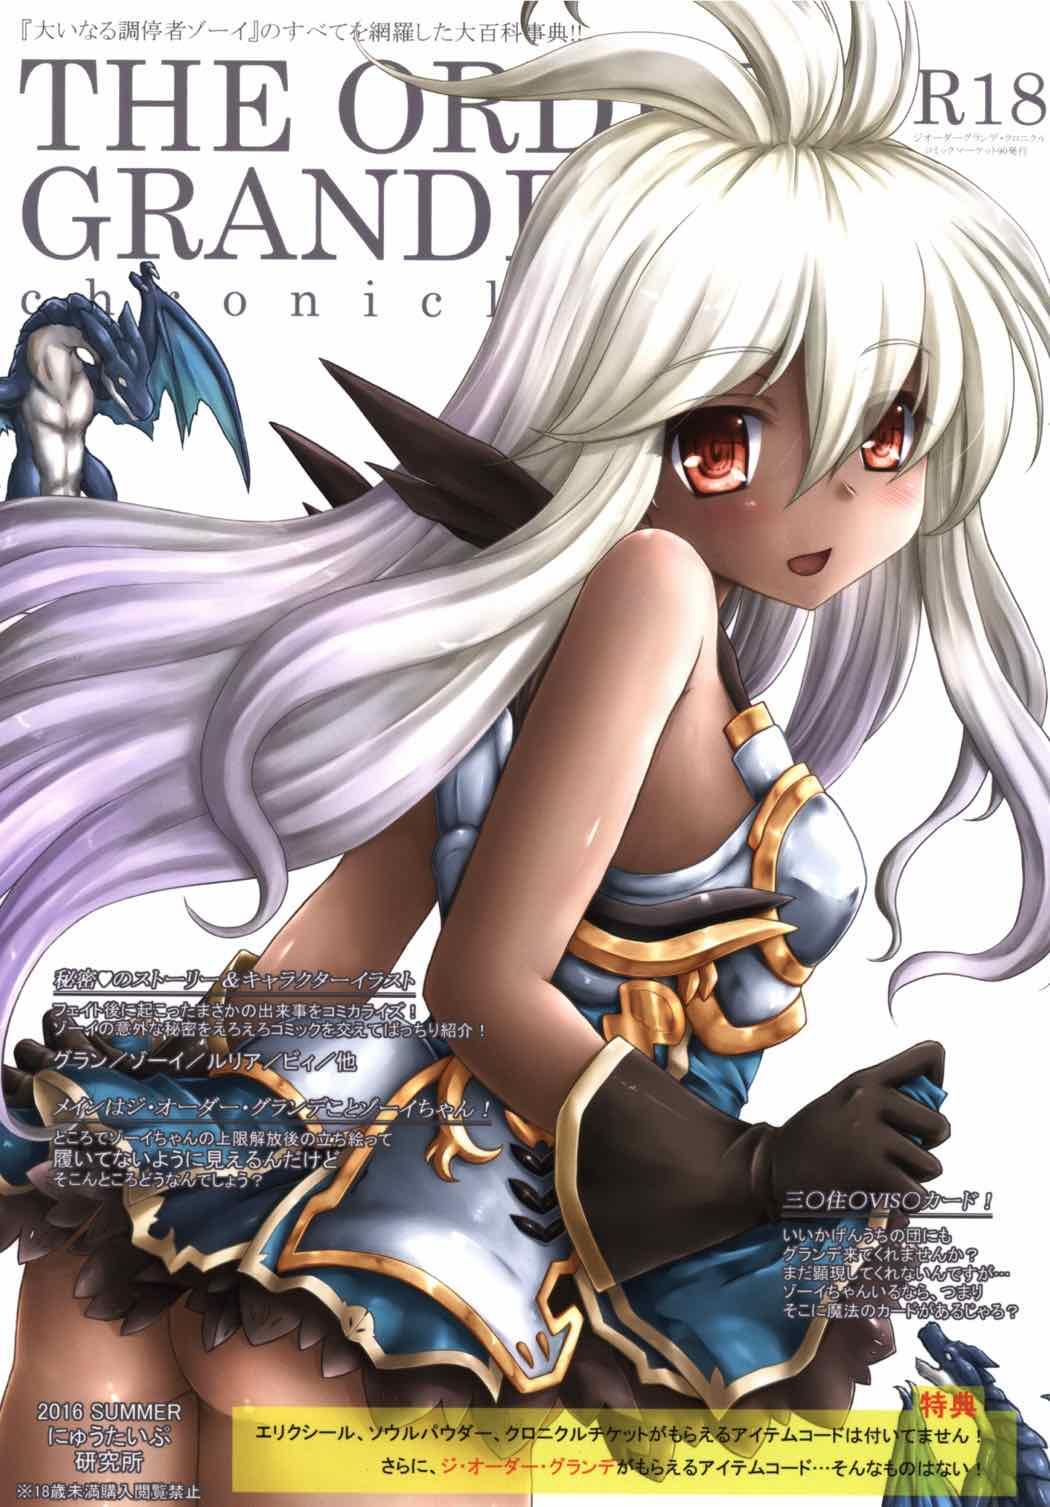 Free 18 Year Old Porn THE ORDER GRANDE chronicle - Granblue fantasy Blackmail - Picture 1